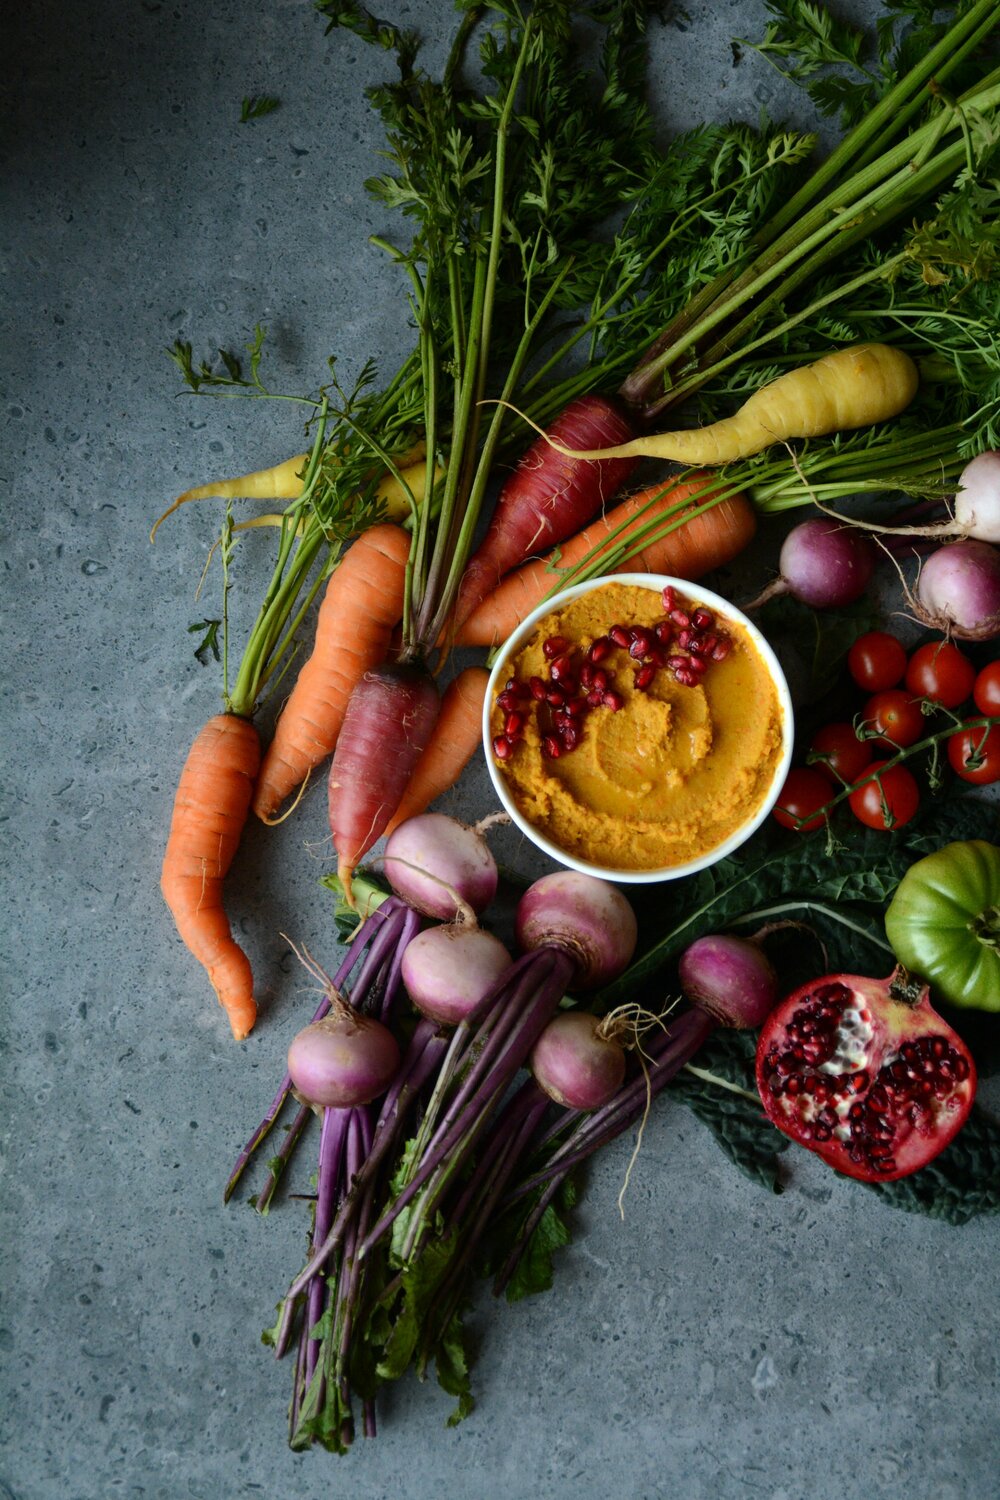 With vibrant colors and loaded with nutrition, foods like carrots, purple top turnips, tuscan kale, tomatoes, pomegranate, and a carrot hummus make a striking presentation.